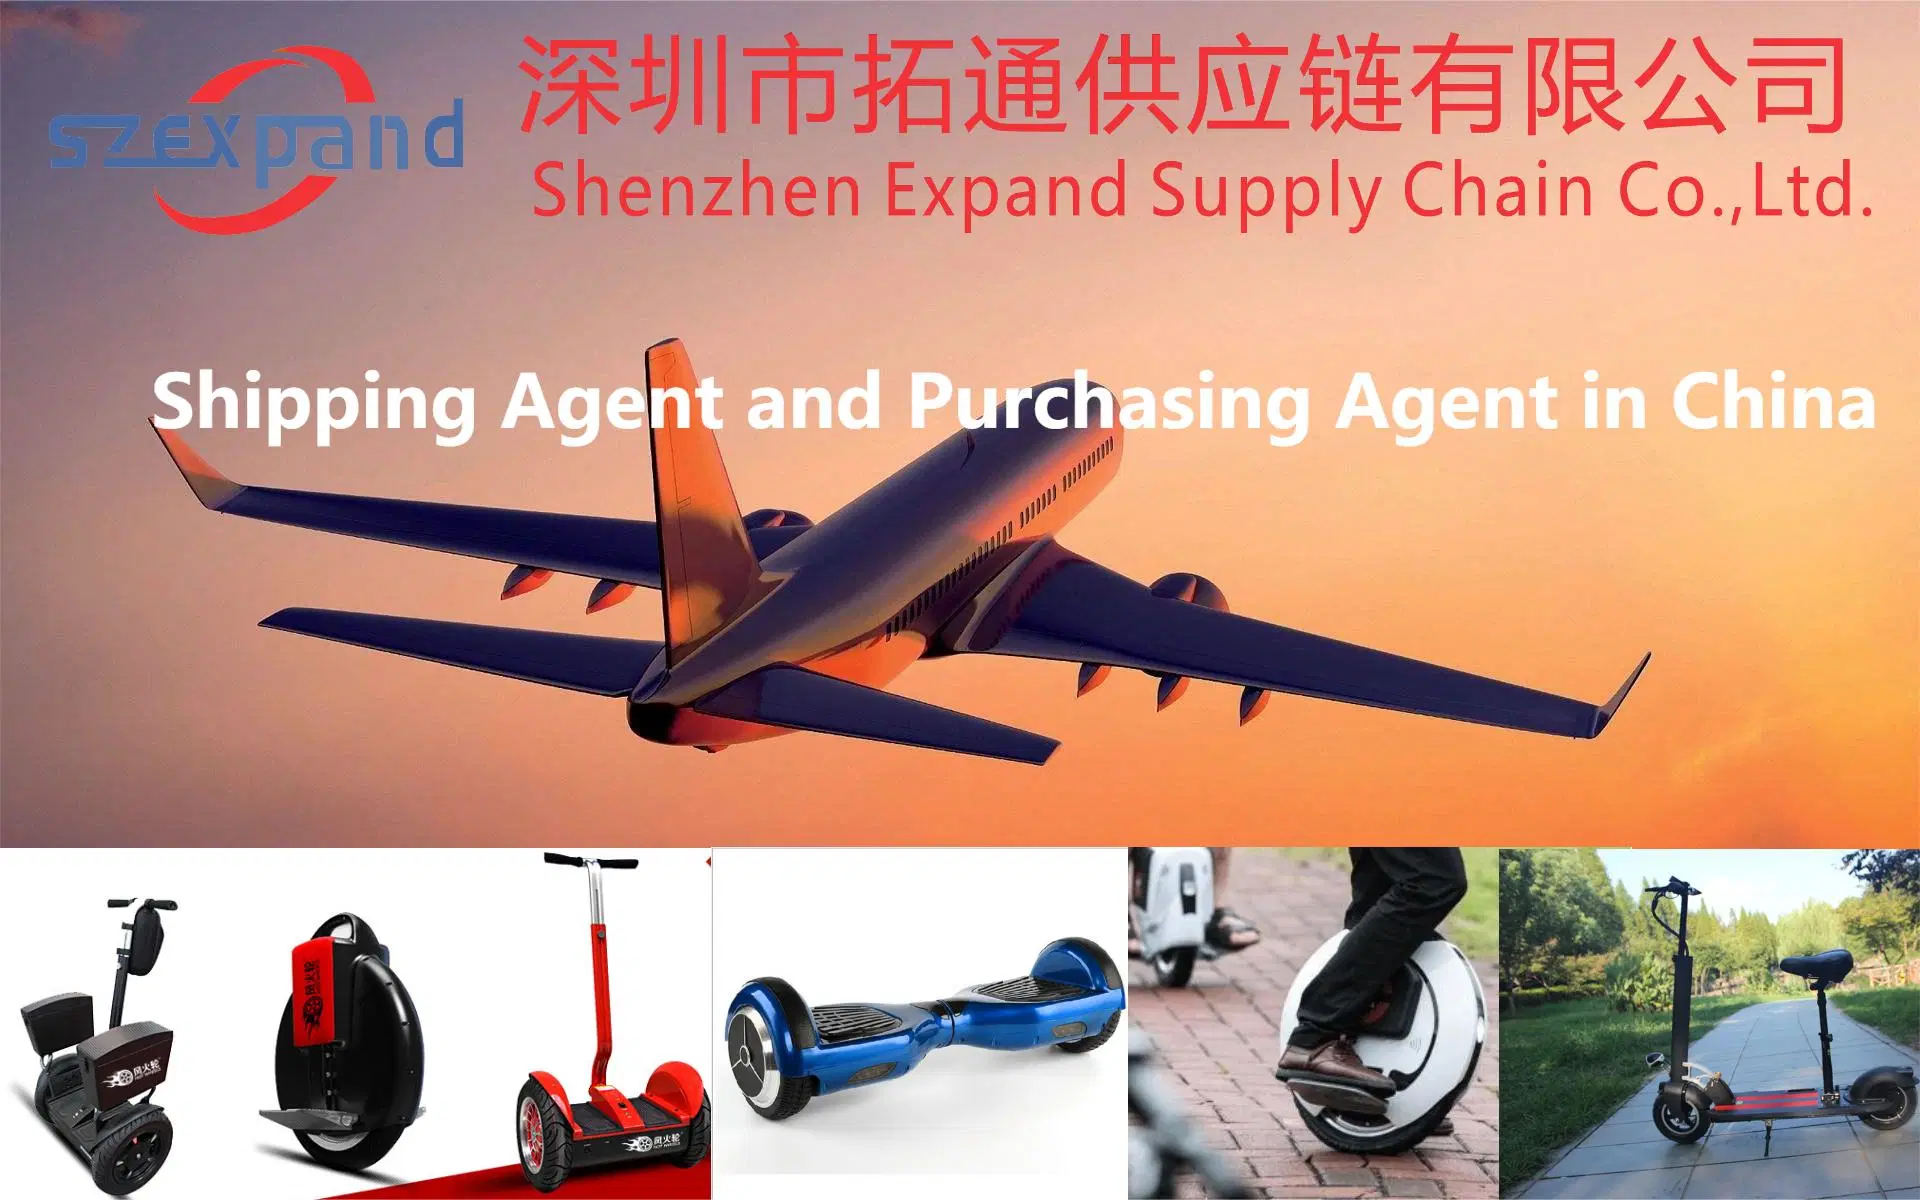 Alibaba Express Delivery,by Air/Sea/Railway Cargo/Freight/Shipping Container LCL Agent  From China to Europe,Rotterdam,Belgium Amazon/Fba DDP/DDU Fast Logistics